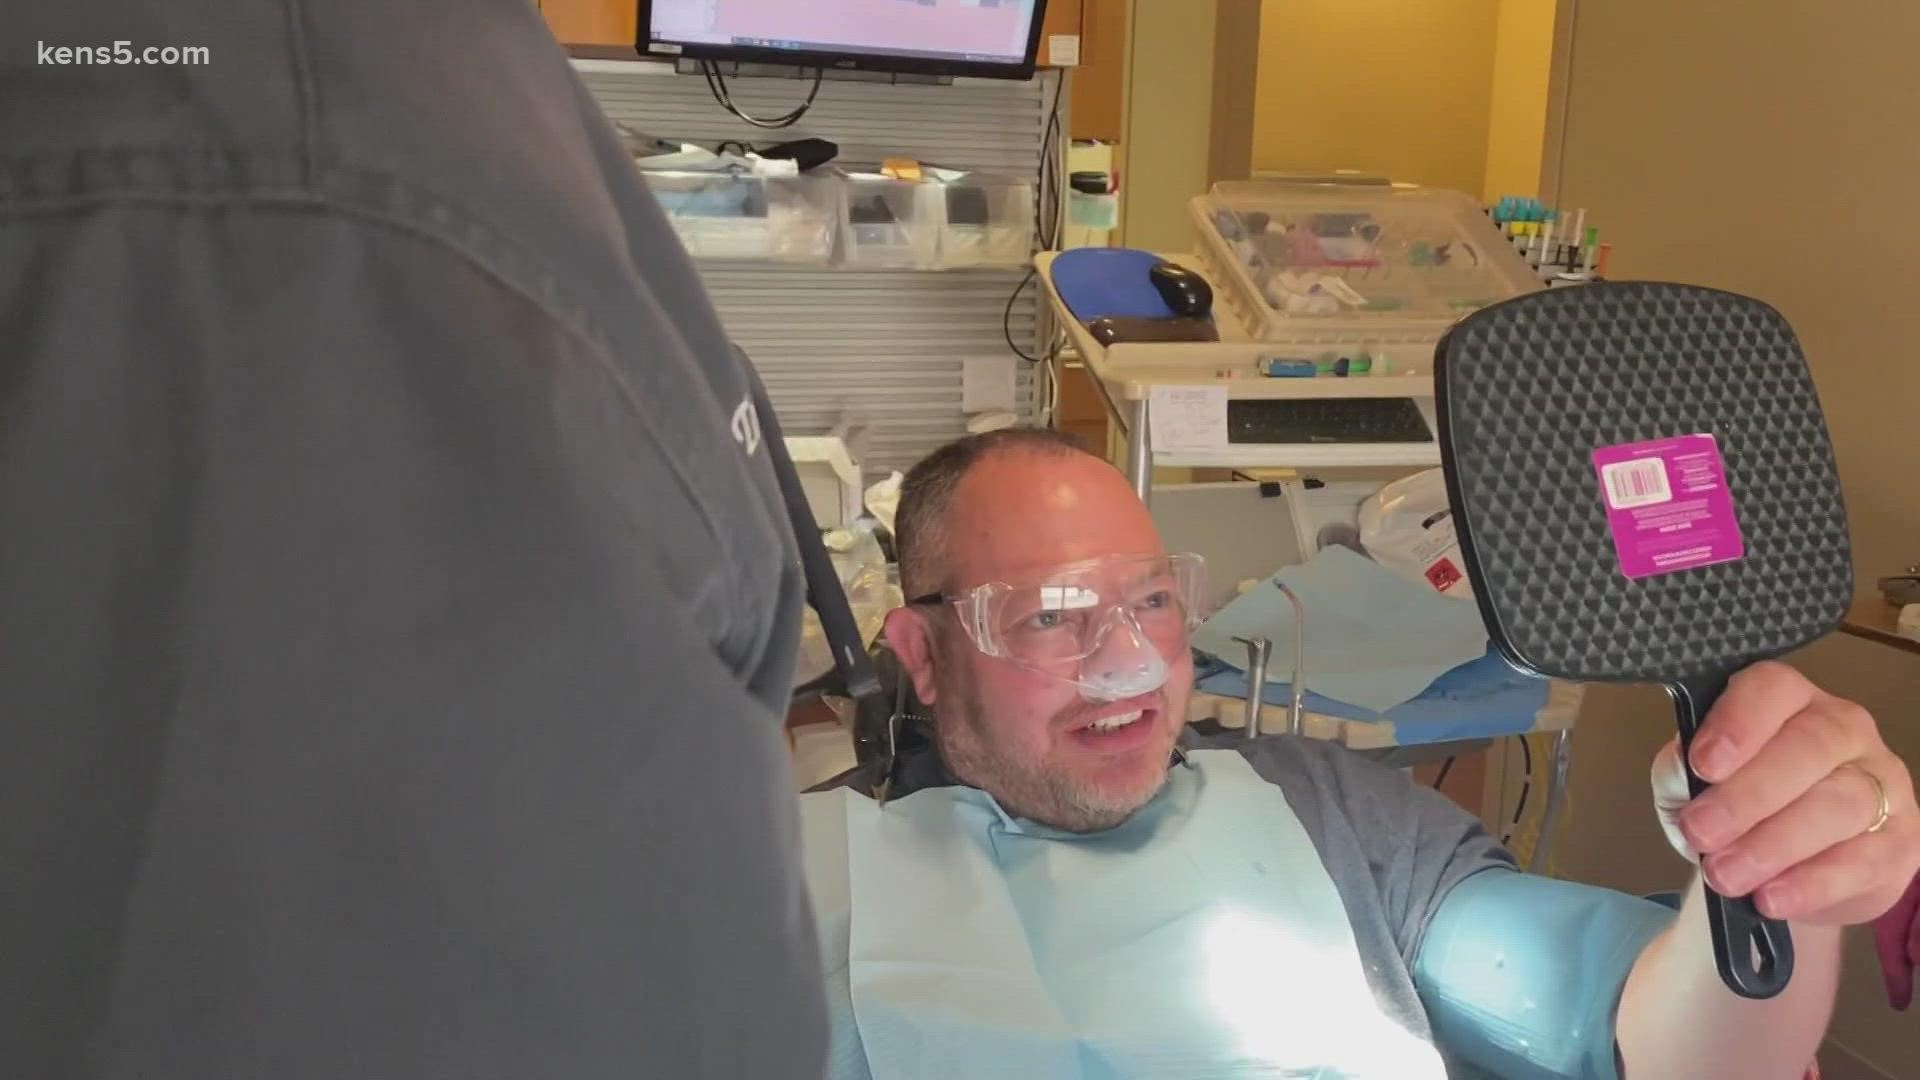 An Iraqi Freedom veteran was suffering from the effects of an anthrax vaccine which left him with rotting teeth. A Texas dentist helped him at no cost.